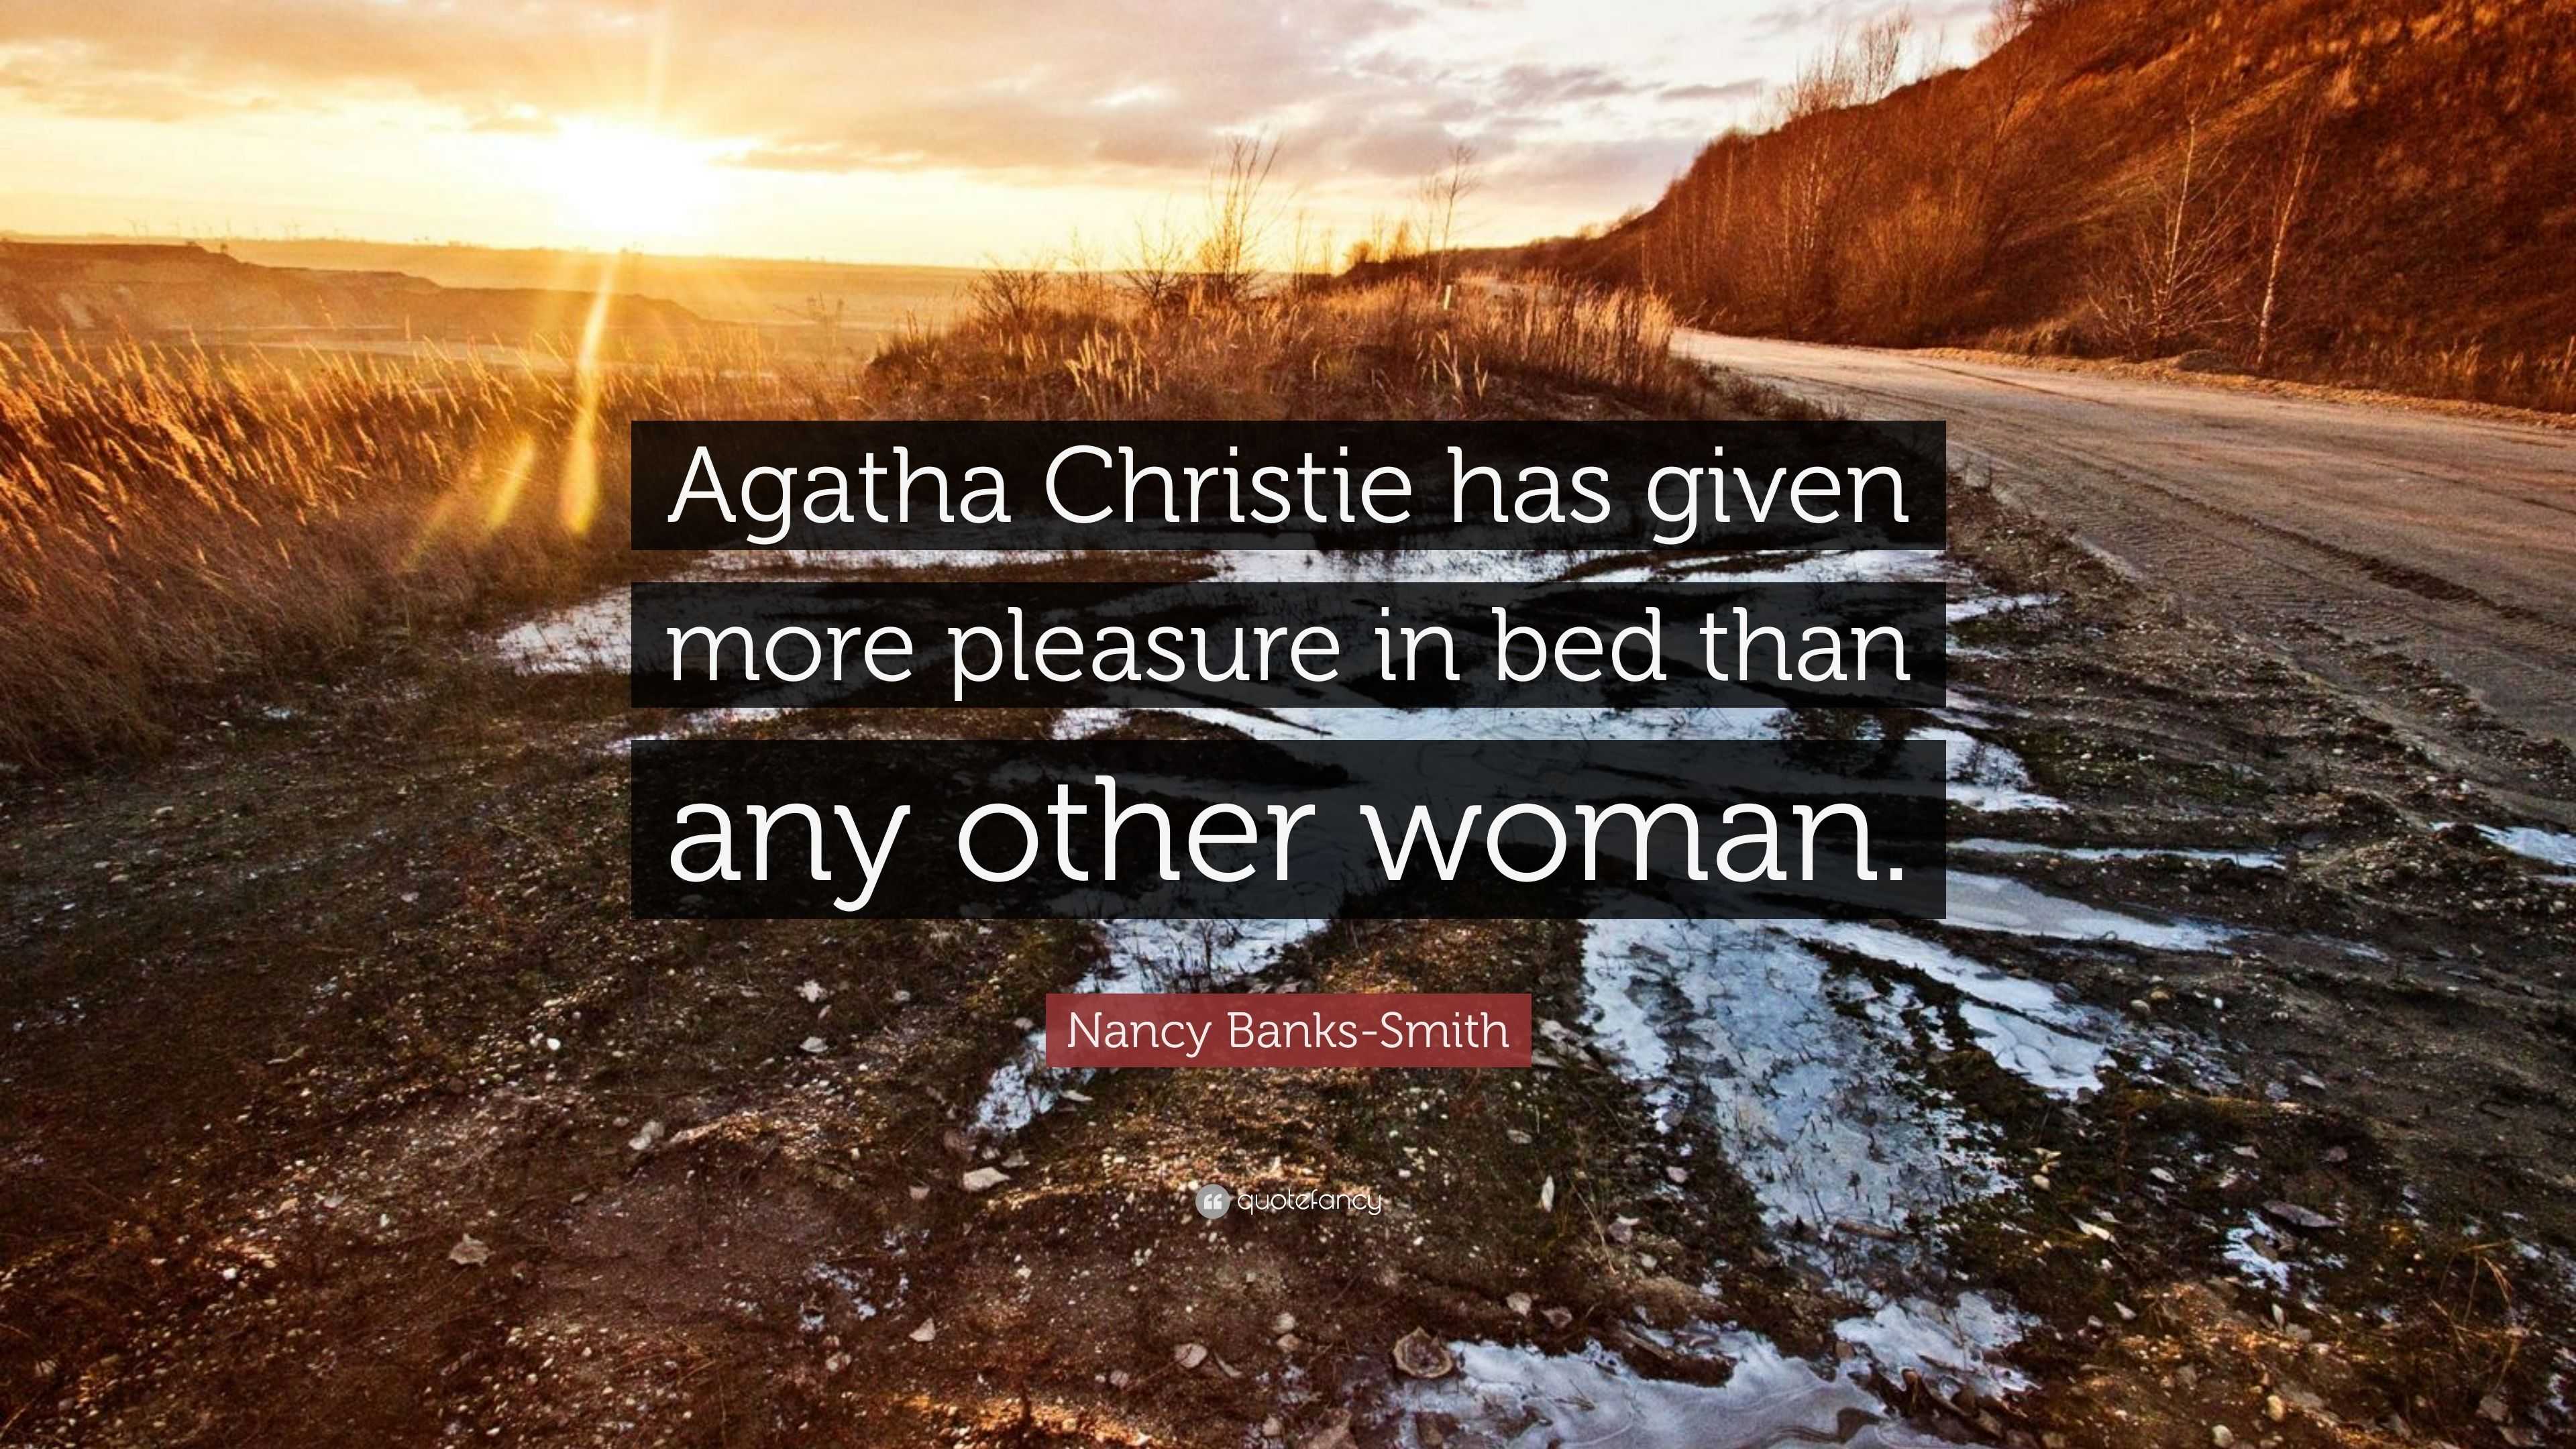 Nancy Banks Smith Quote “agatha Christie Has Given More Pleasure In Bed Than Any Other Woman” 2284